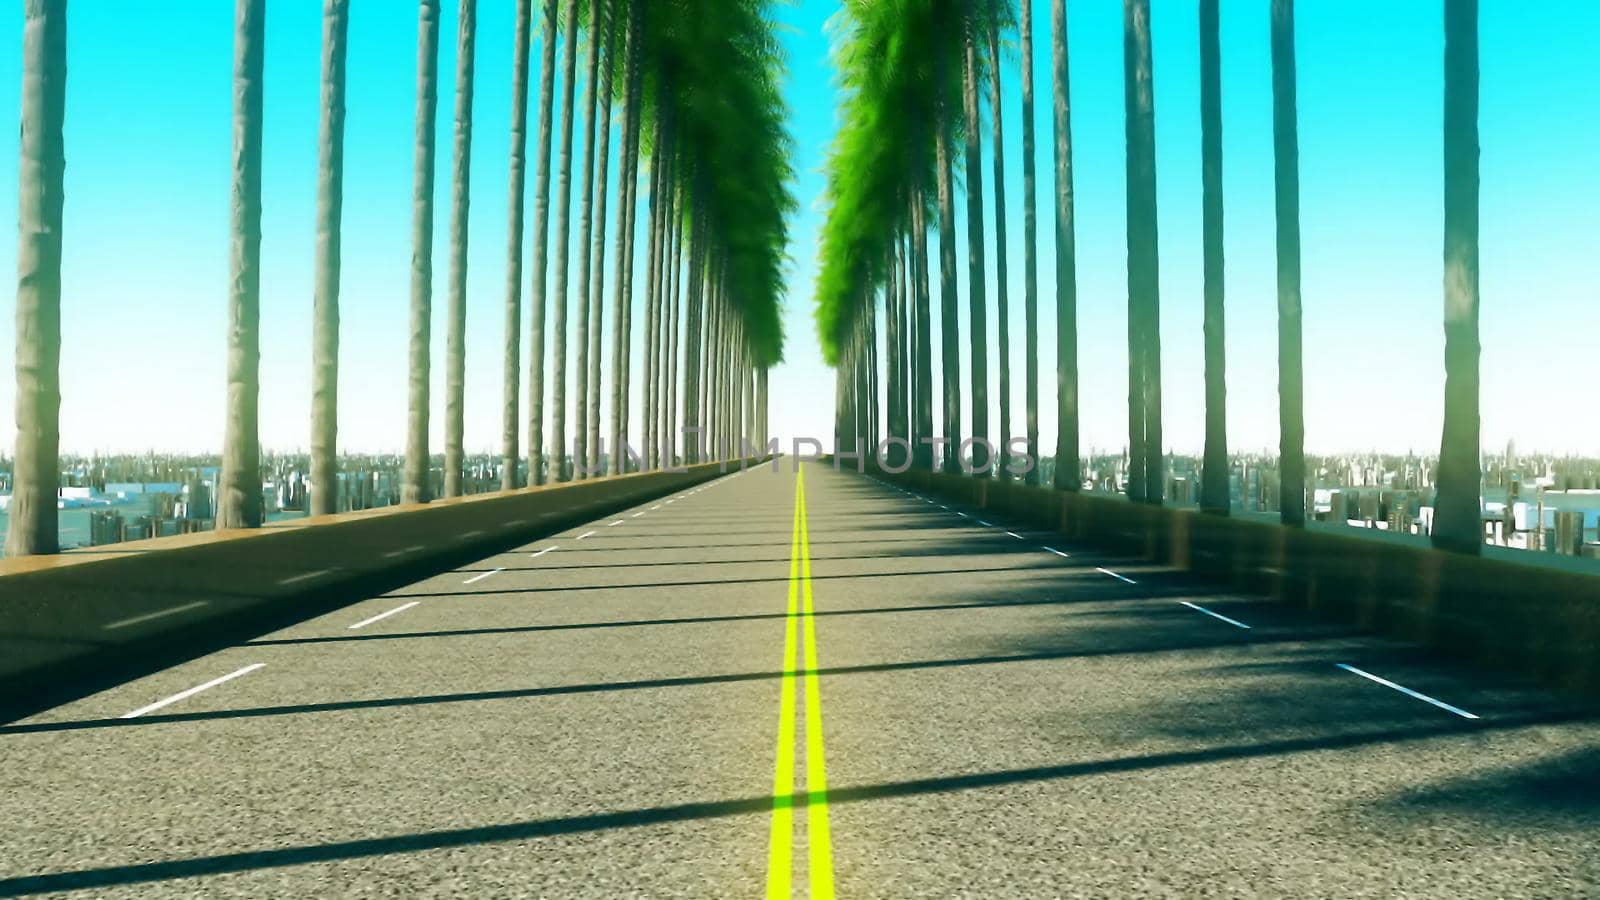 Driving through palm trees on an empty road in the afternoon